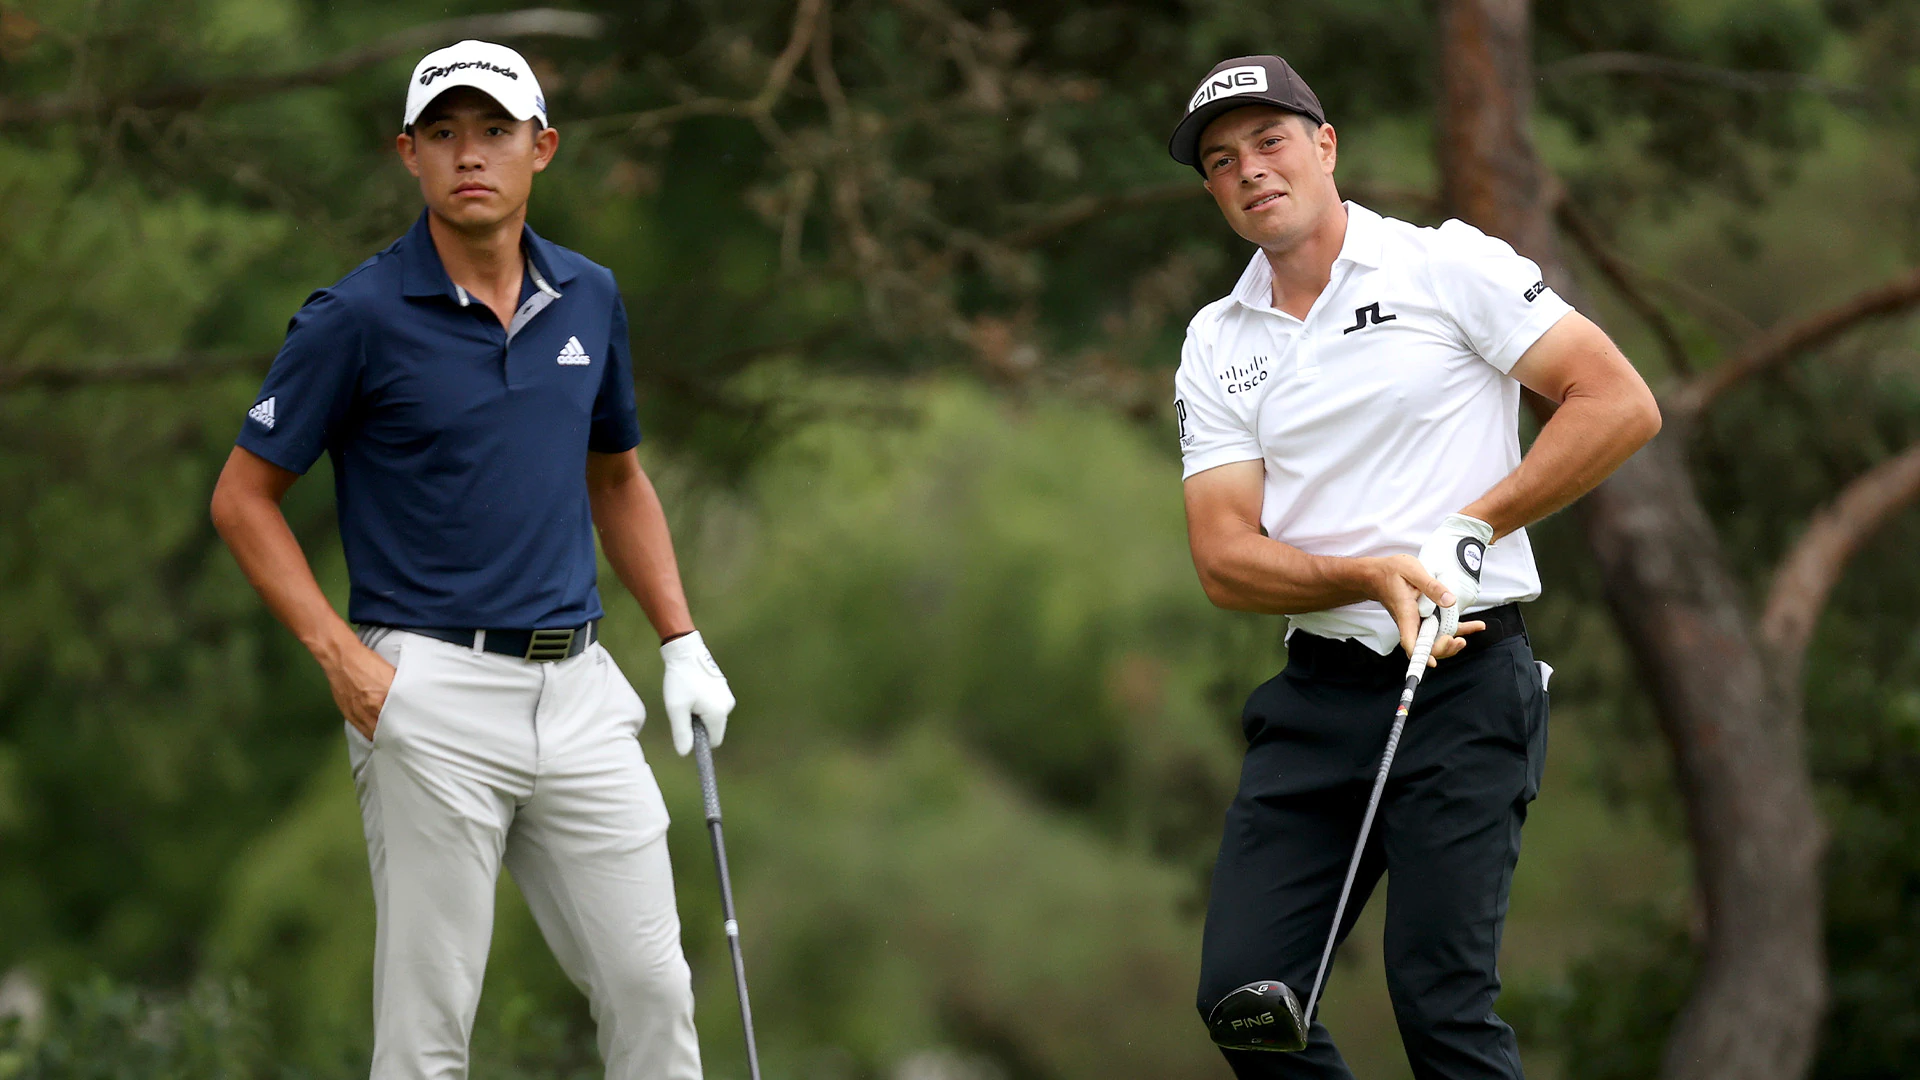 Zurich Classic Odds: Team of Collin Morikawa and Viktor Hovland favorites